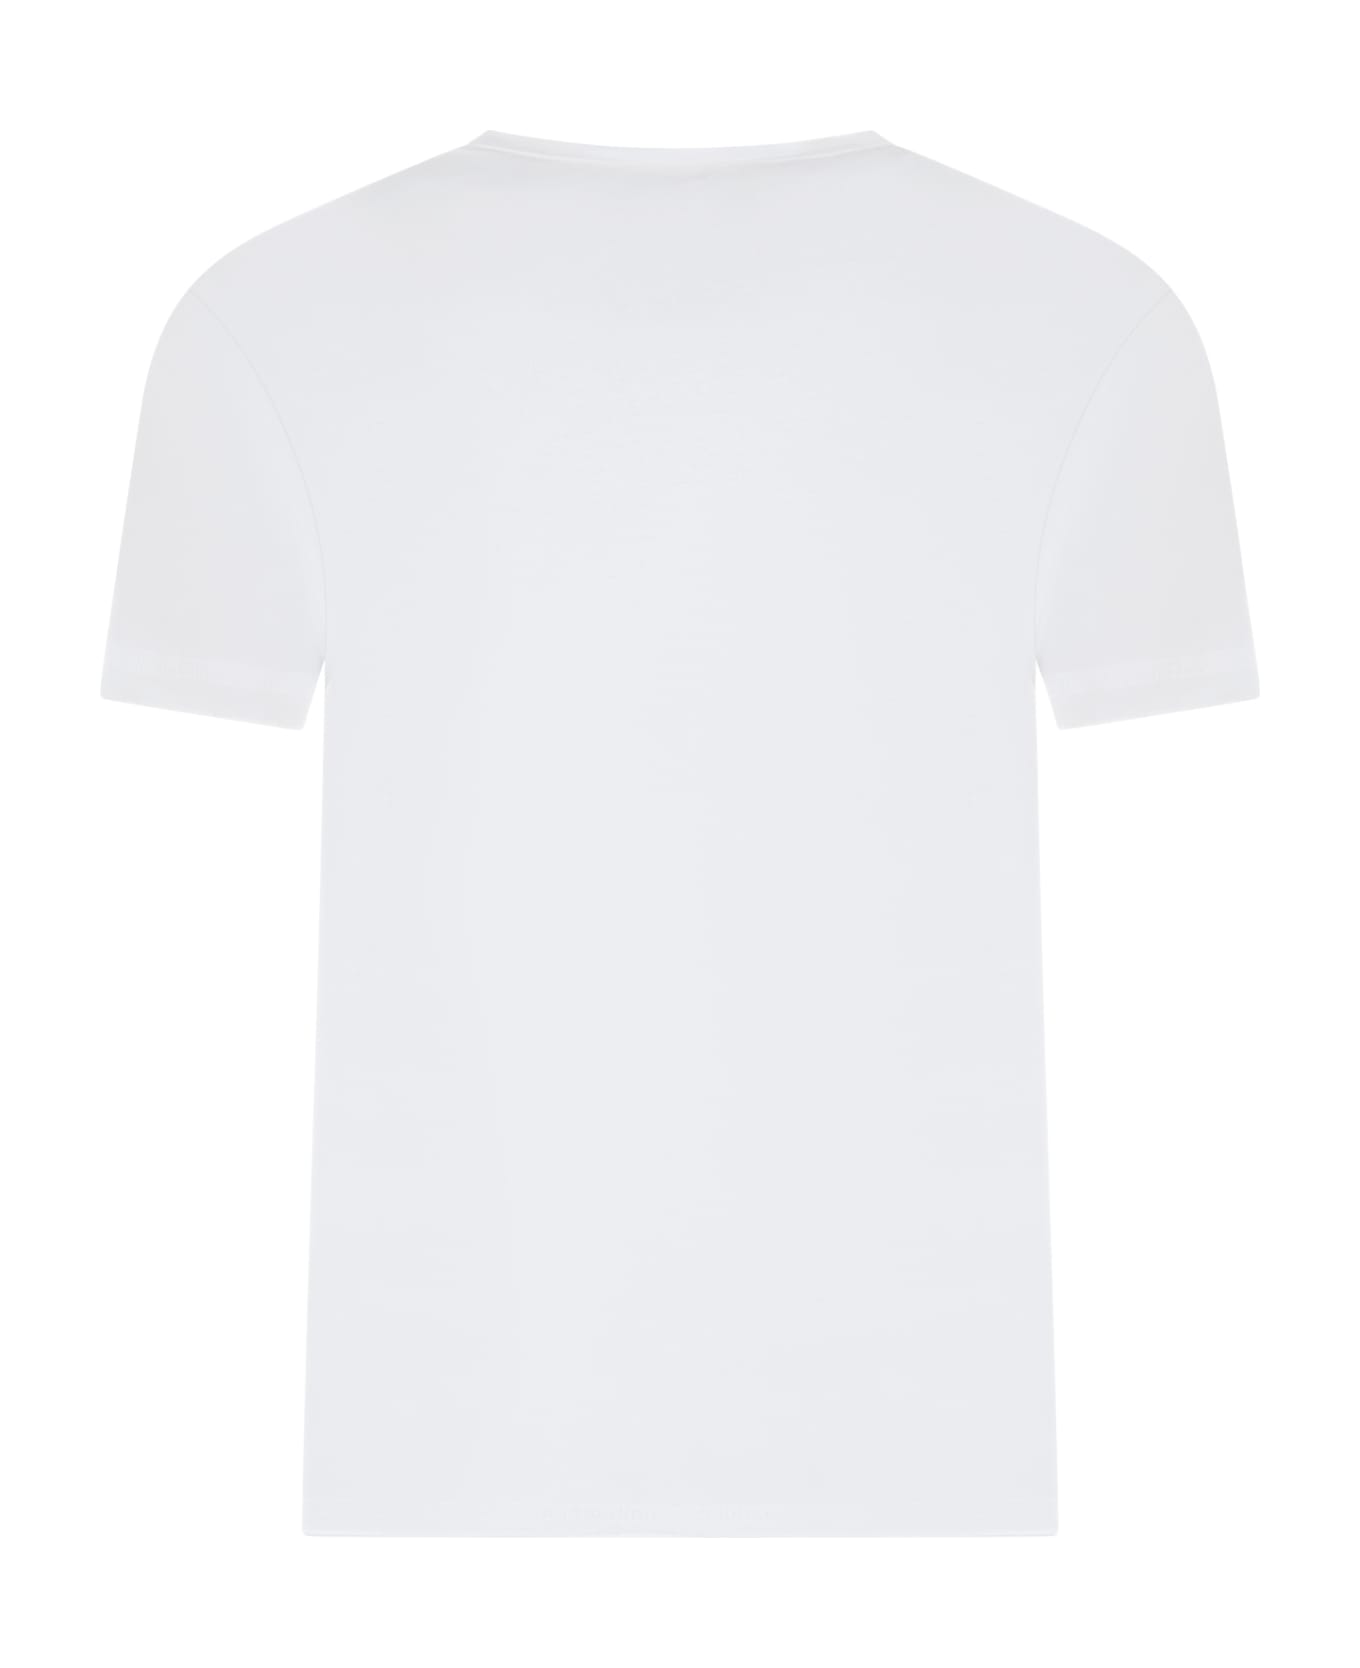 Zadig & Voltaire White T-shirt For Boy With Black Writing - White